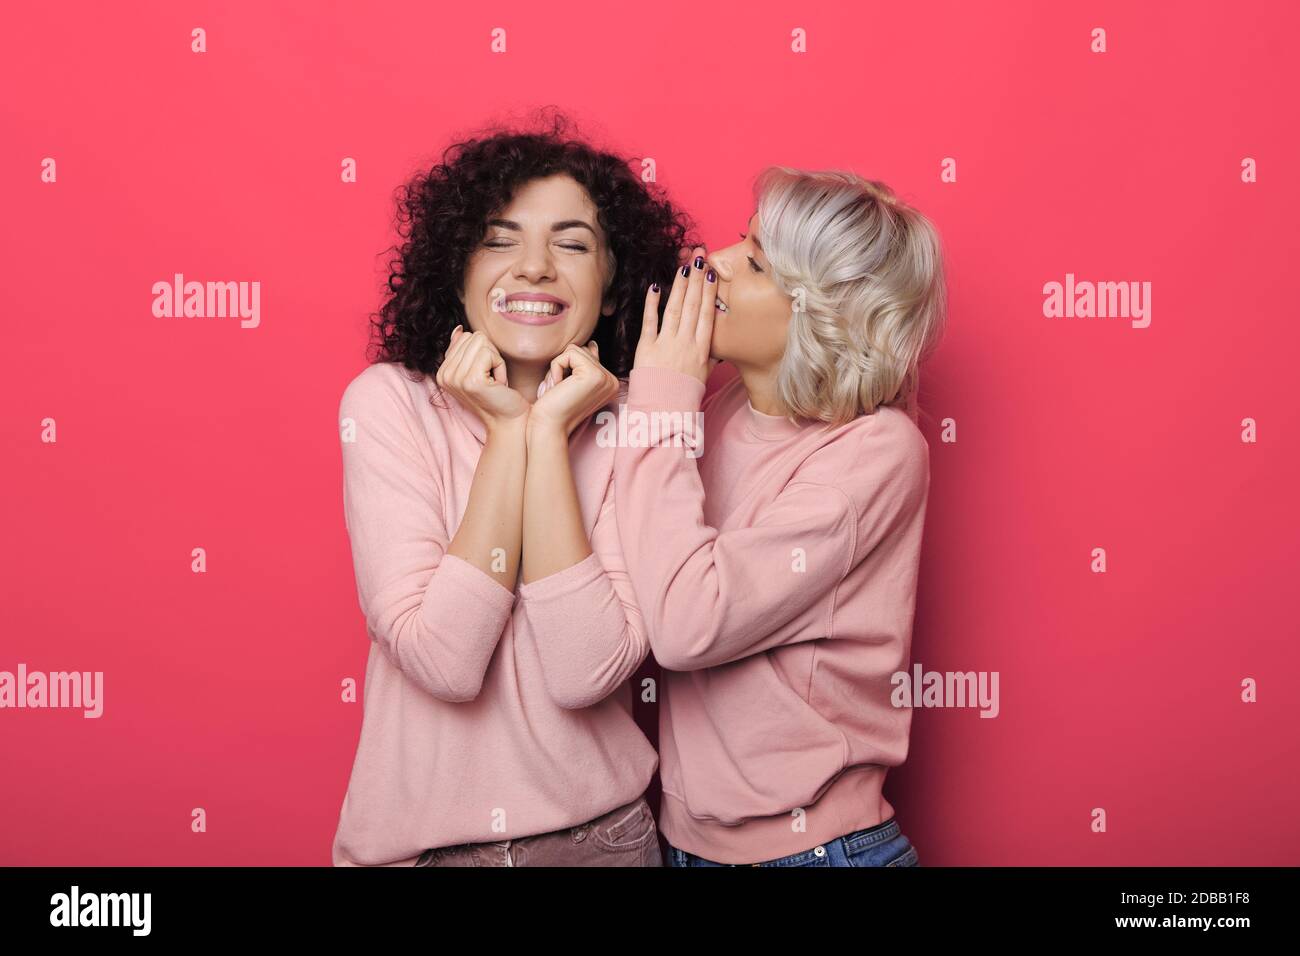 Adorable woman with blonde hair is whispering something to her brunette curly haired sister on red studio wall Stock Photo